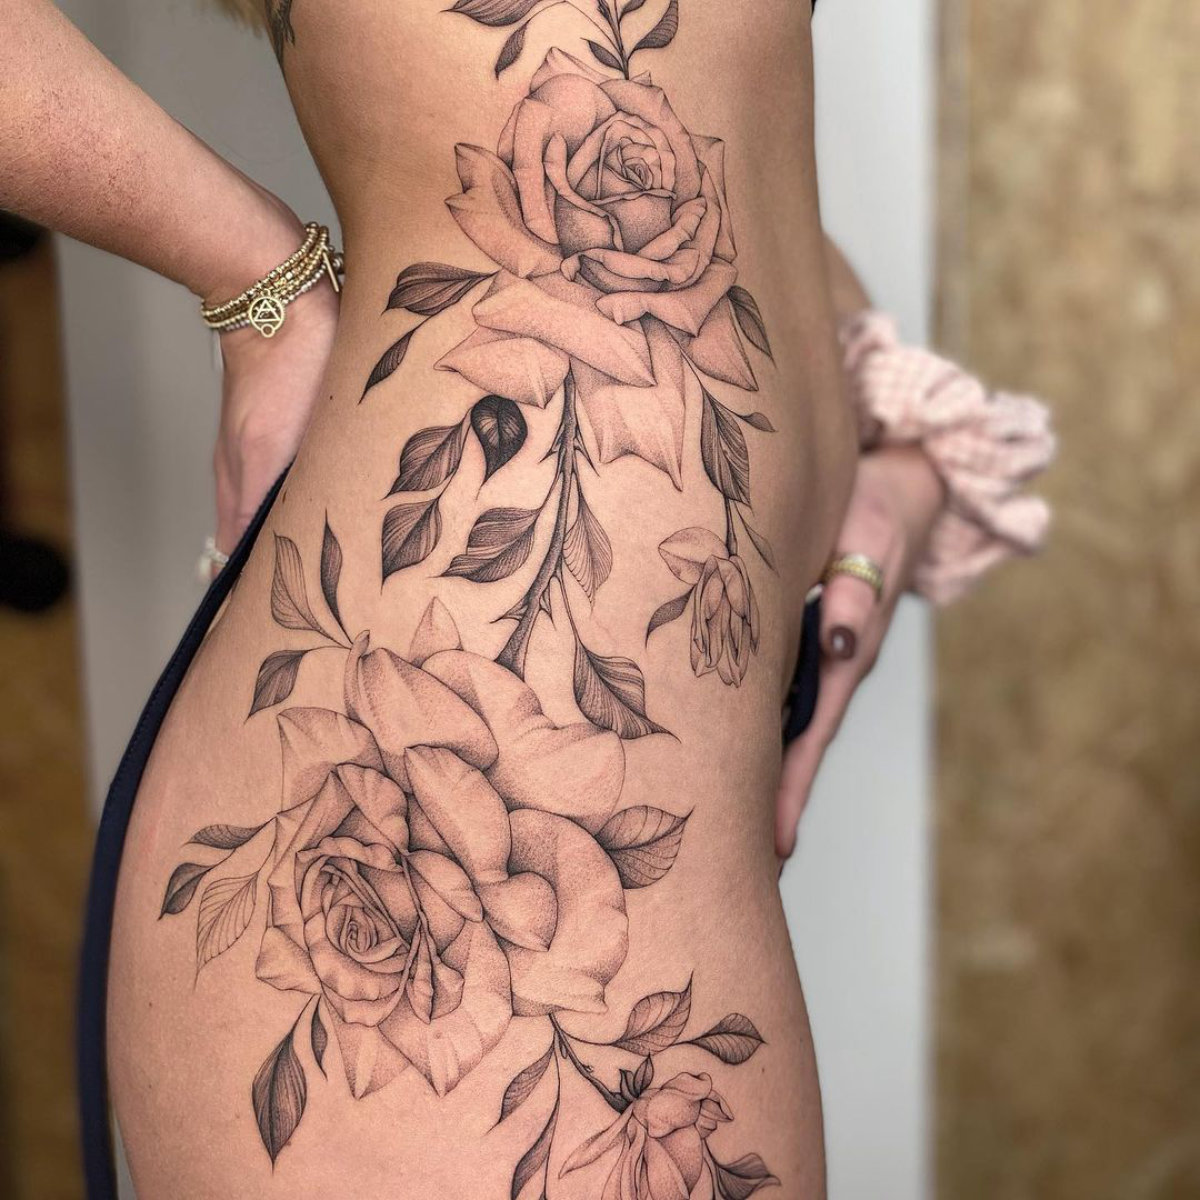 Some roses and filigree for Nola - Dolly's Skin Art Tattoo Kamloops BC